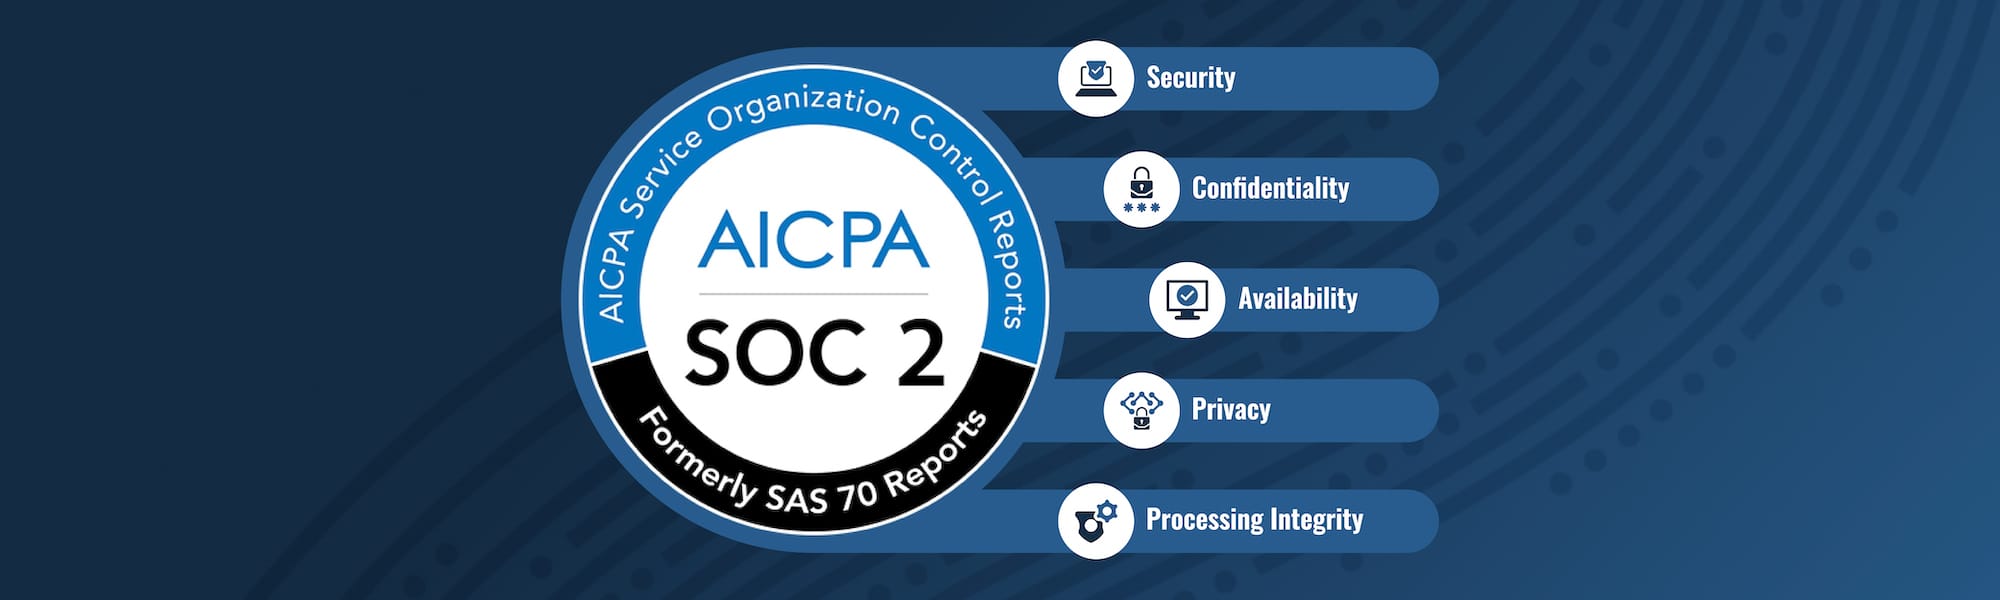 SOC 2 badge with icons to the right representing the words Security, Confidentiality, Availability, Privacy, and Processing Integrity.